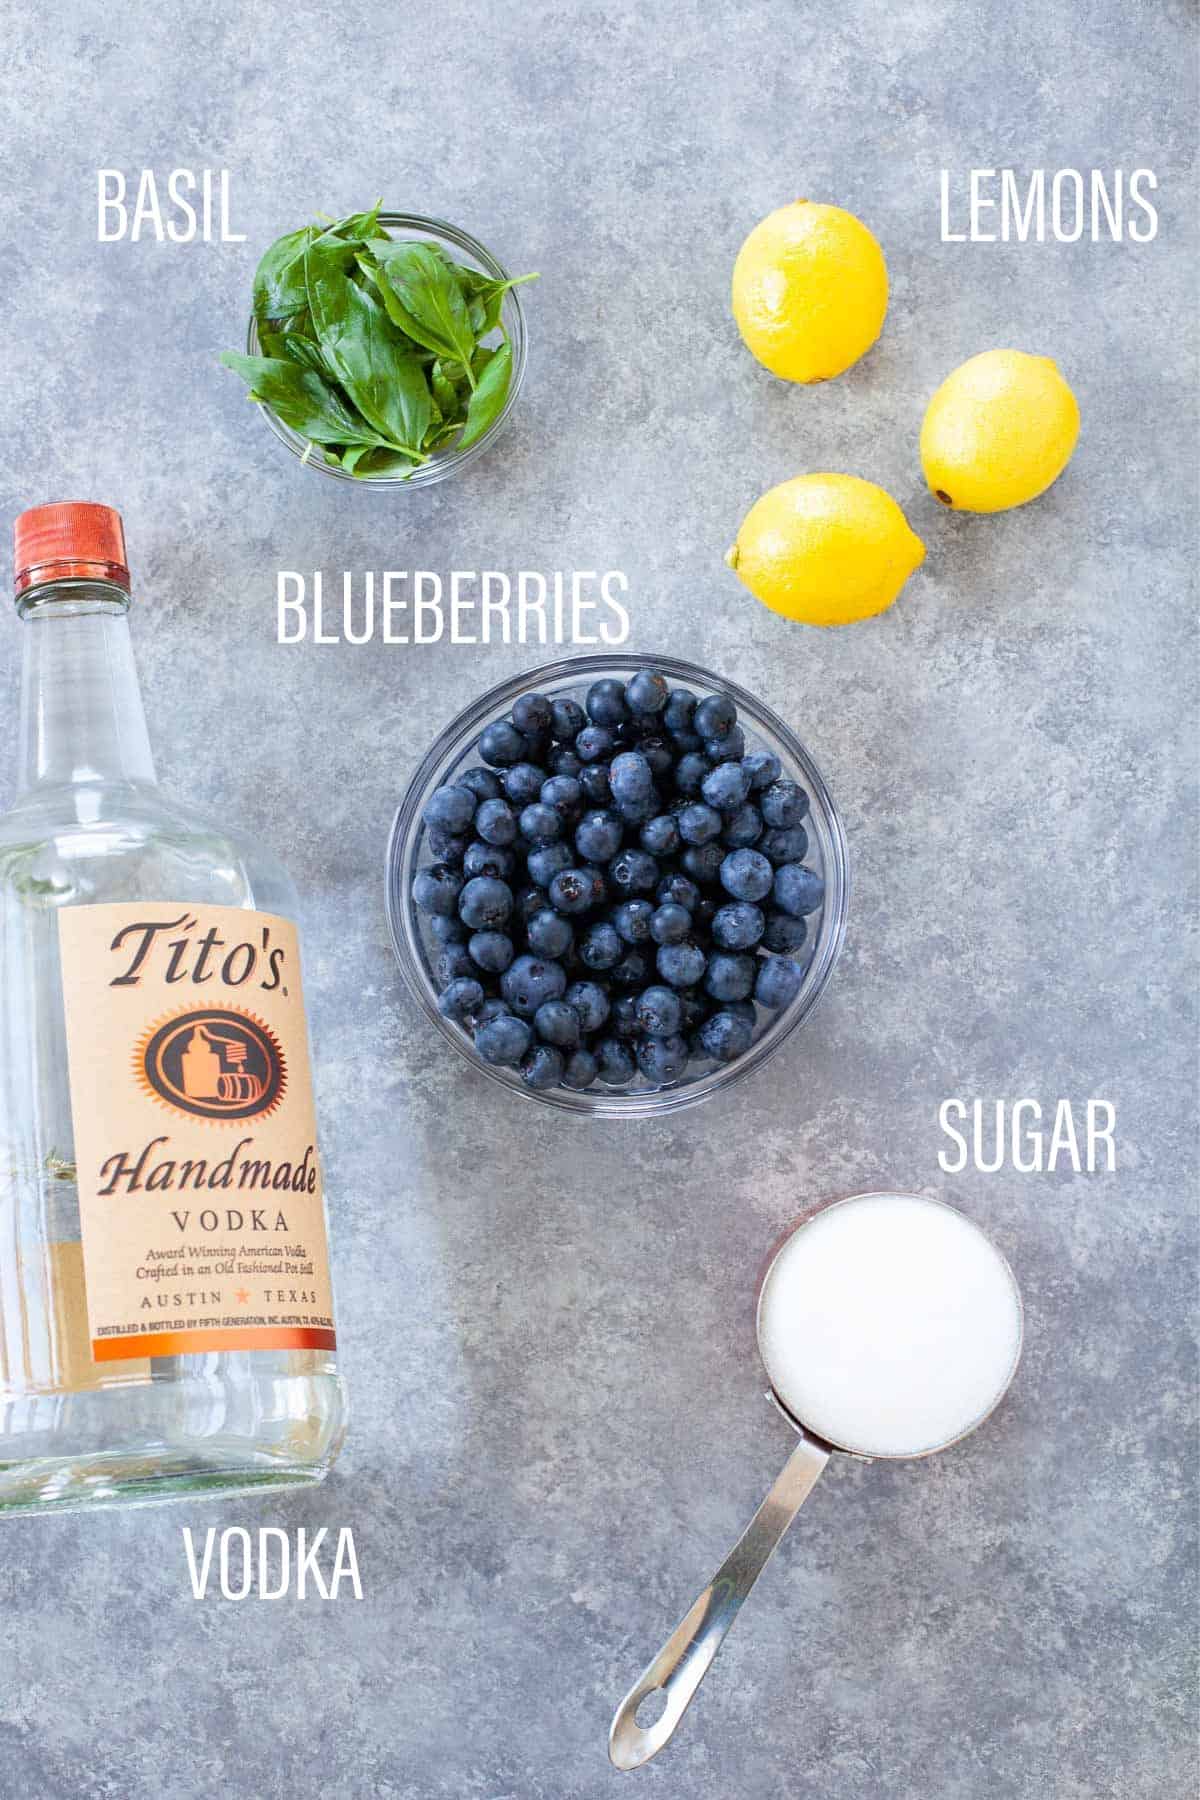 basil, lemons, bowl of blueberries, measuring cup of sugar, and bottle of vodka laid out on surface